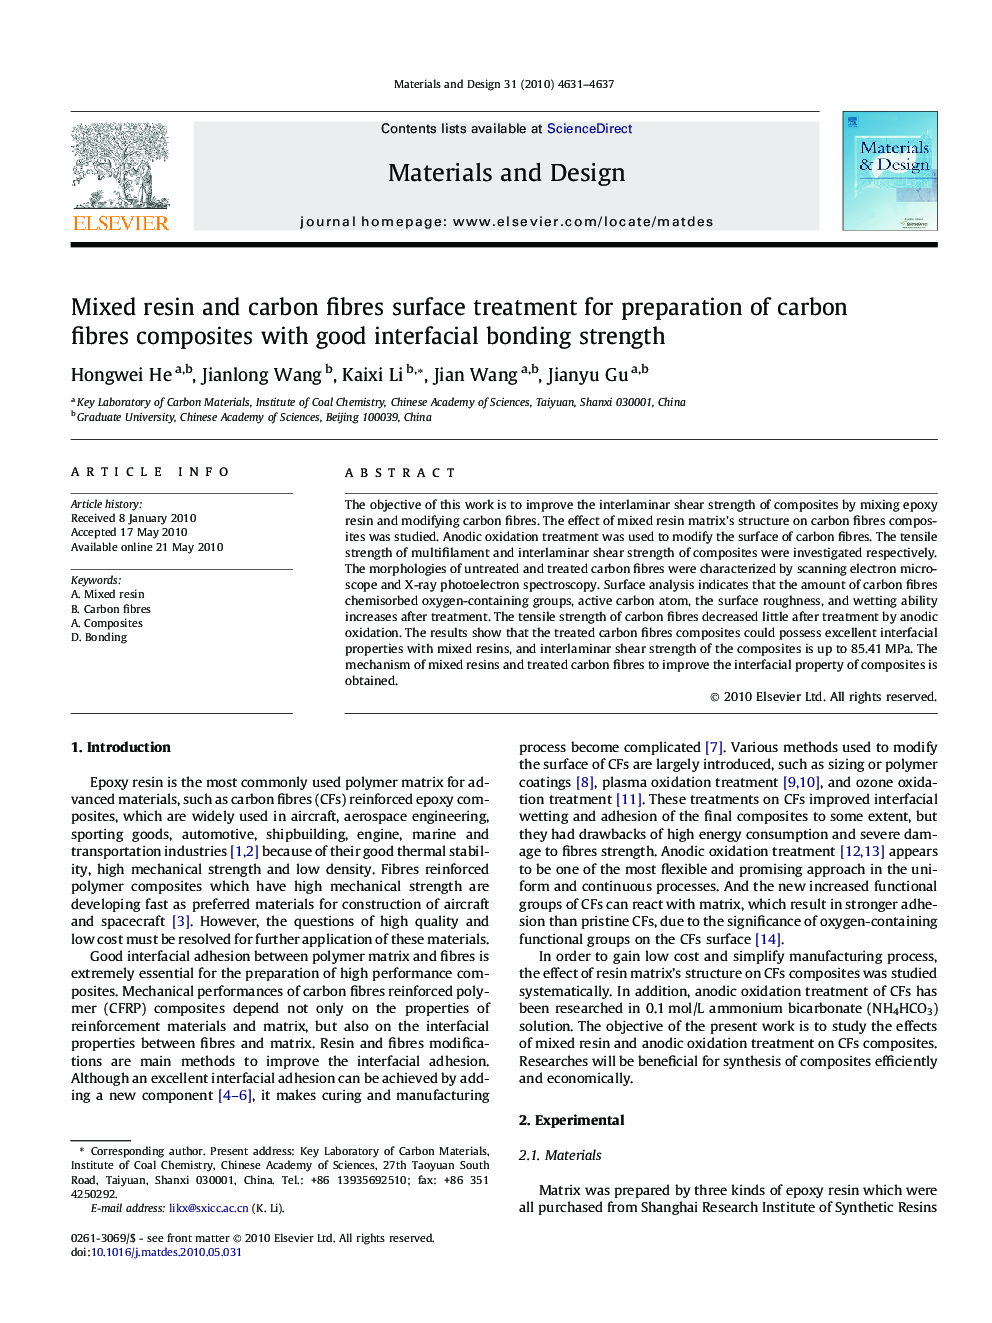 Mixed resin and carbon fibres surface treatment for preparation of carbon fibres composites with good interfacial bonding strength